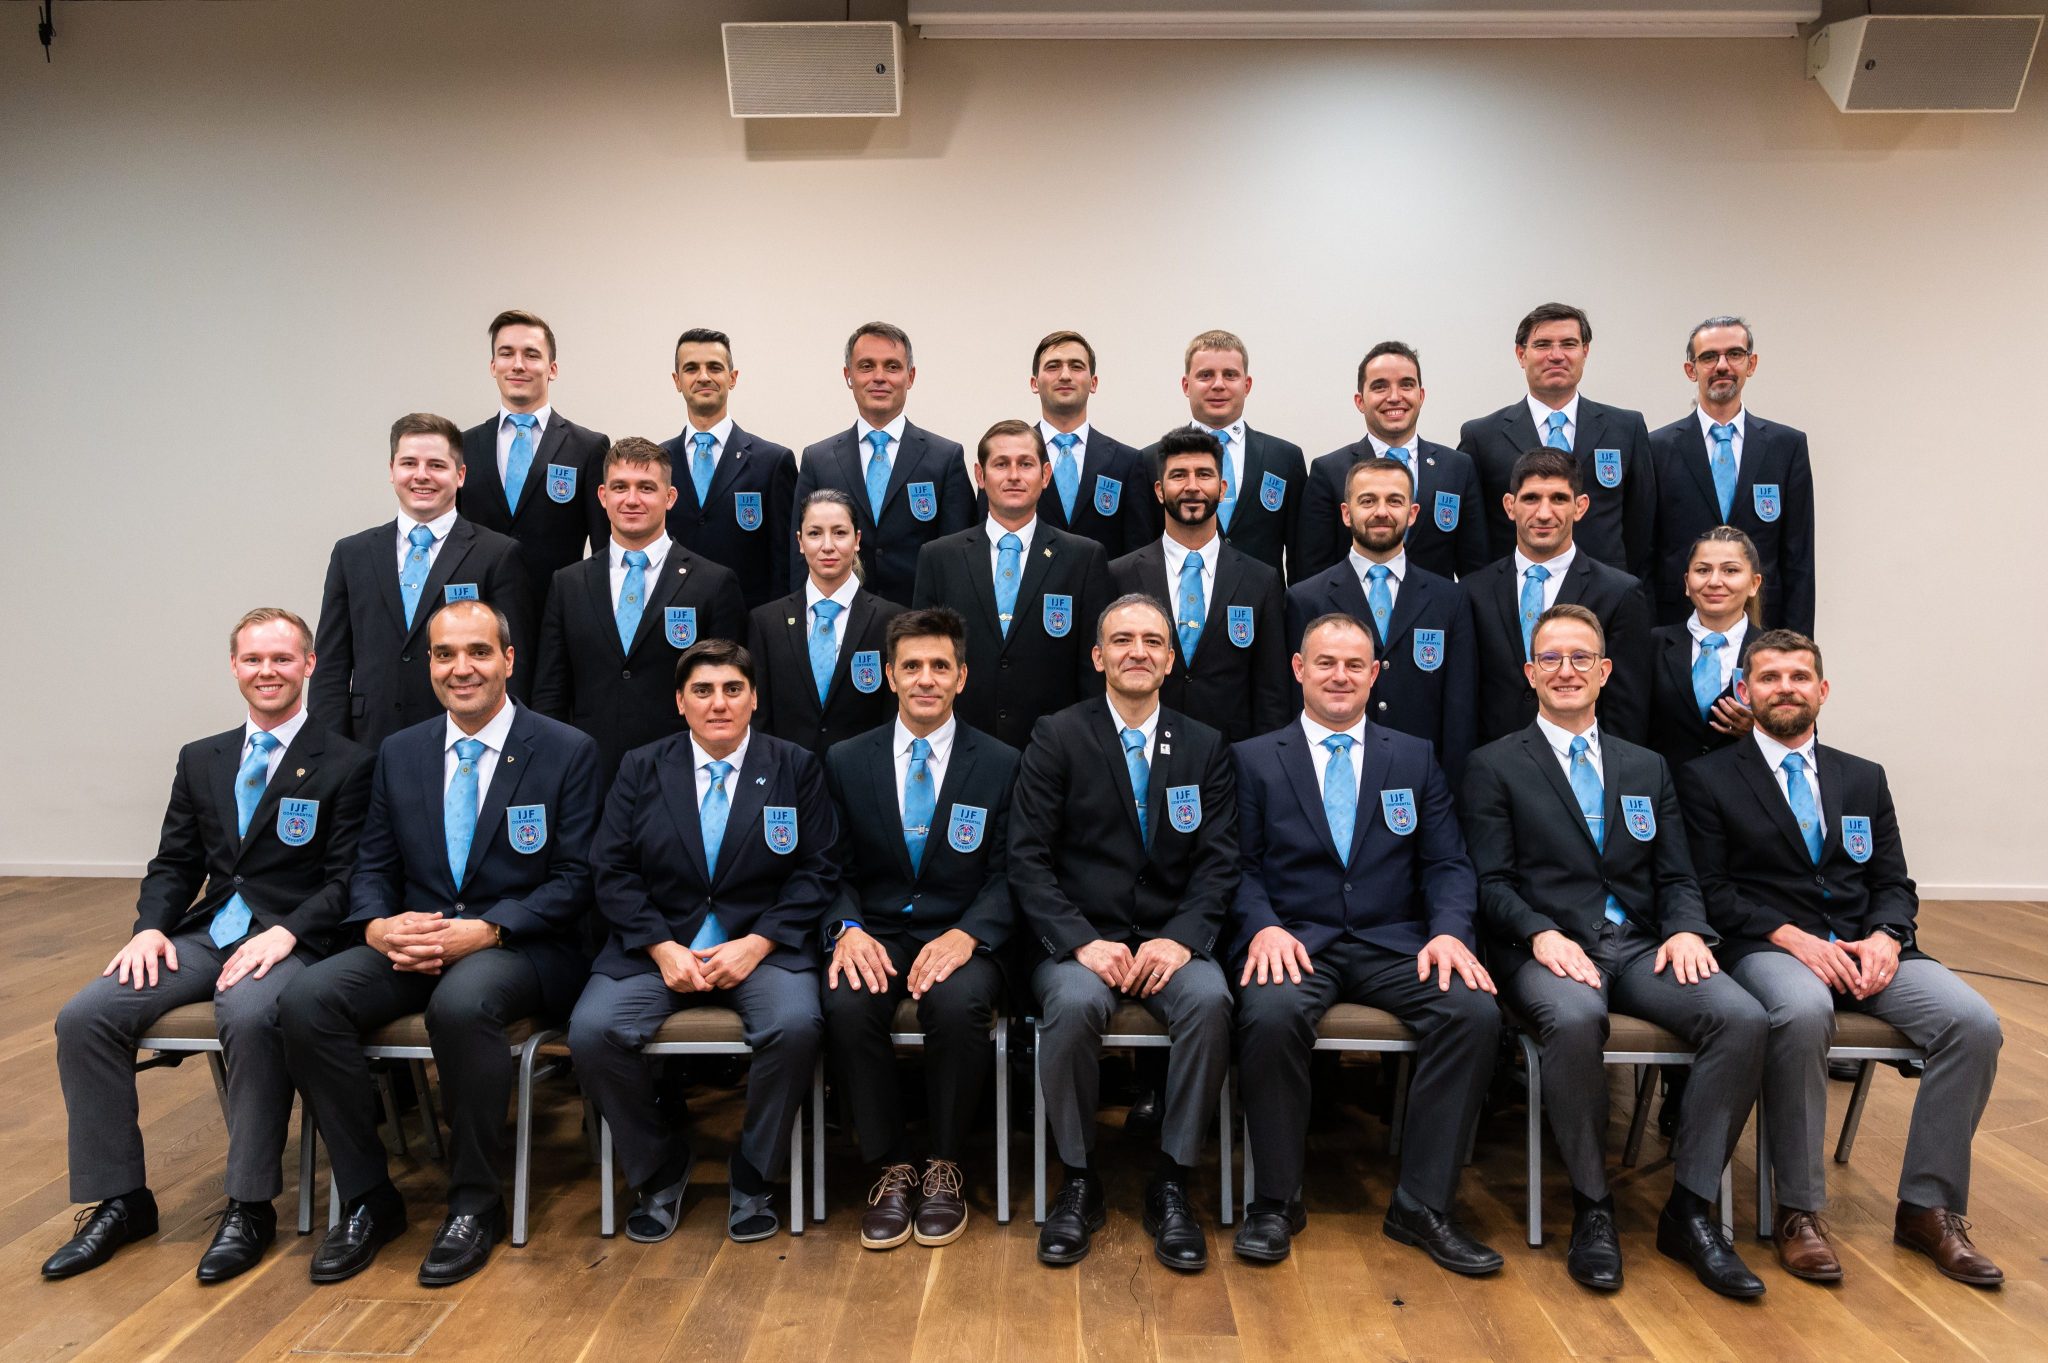 CONTINENTAL EXAM SUCCESS FOR EJU REFEREES